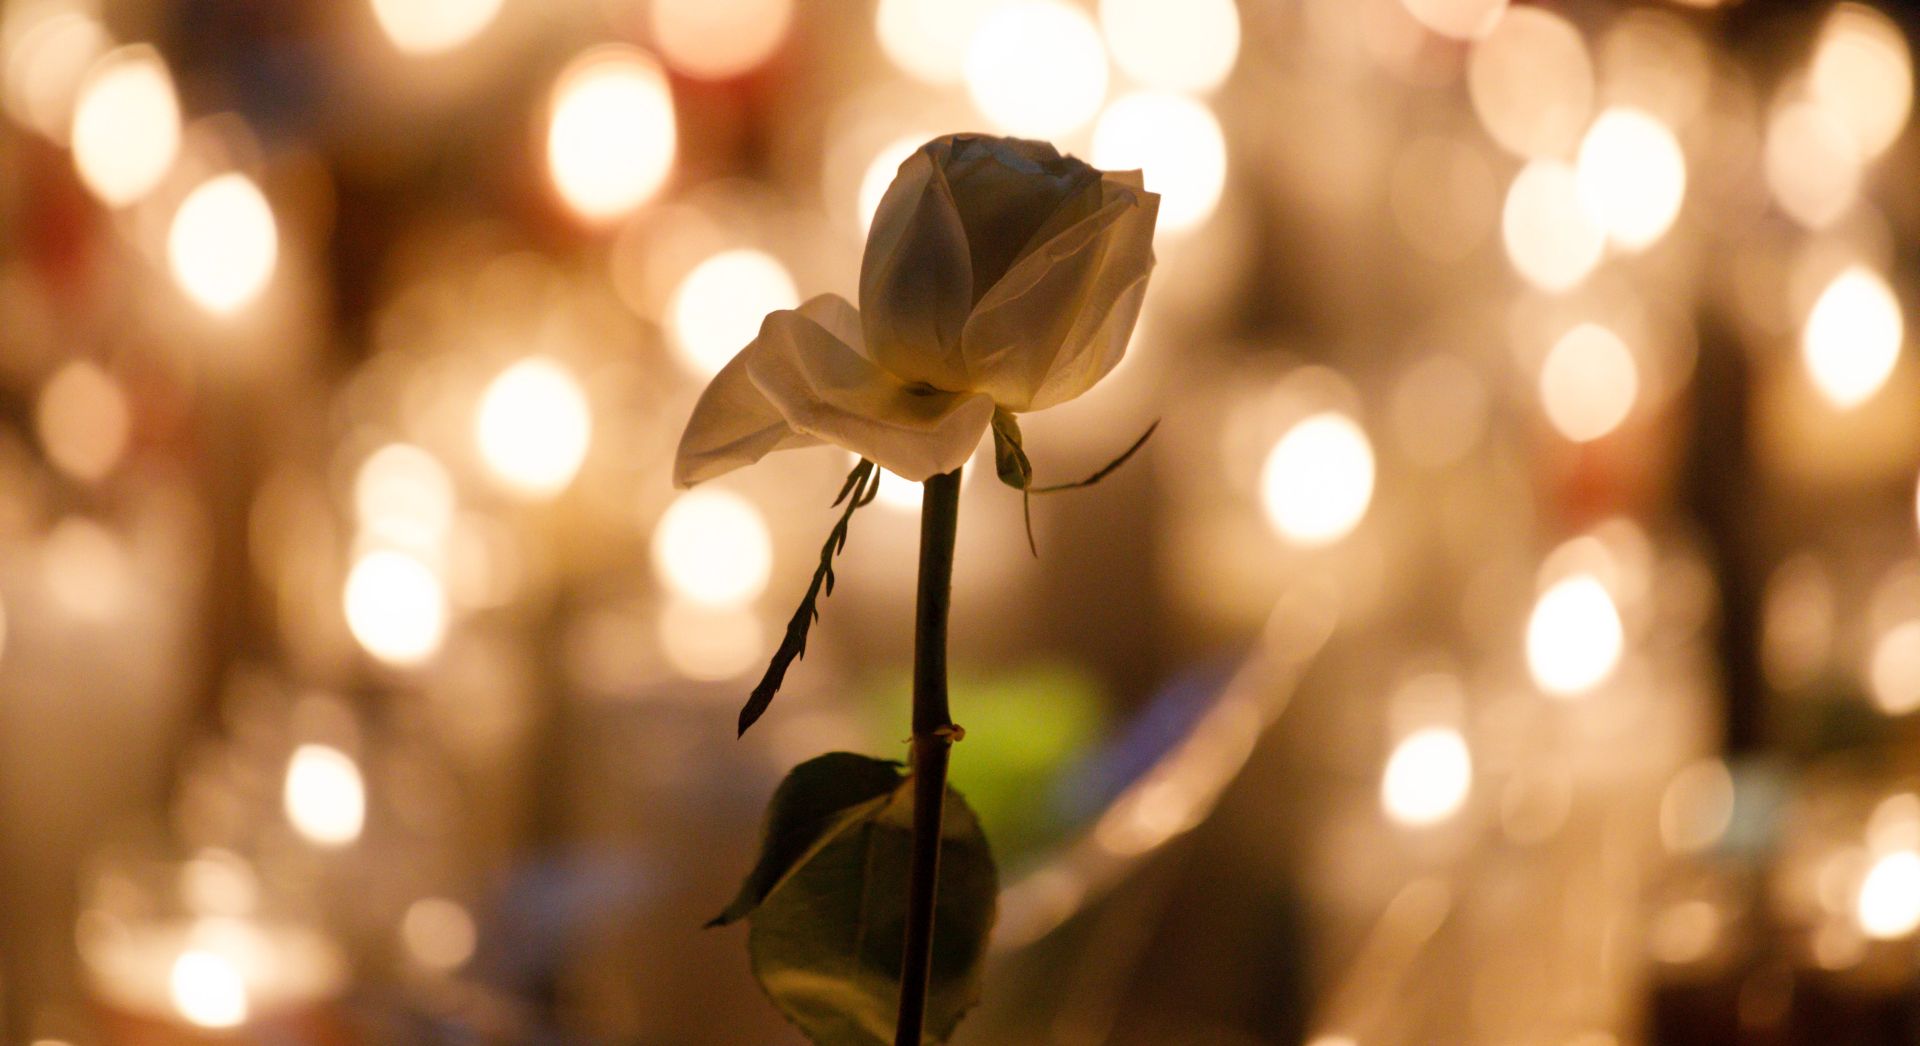 epa06241095 A single white rose is illuminated by dozens of candles at a makeshift memorial on the Las Vegas Strip for the victims of a mass shooting in Las Vegas, Nevada, USA, 02 October 2017. The mass shooting, which left at least 58 people dead and more than 500 injured on 01 October, is the largest in modern US history. The gunman, identified by the police as Stephen Paddock, 64, fired from an upper floor of the Mandalay Bay hotel before reportedly killing himself as police made their way into his hotel room.  EPA/EUGENE GARCIA